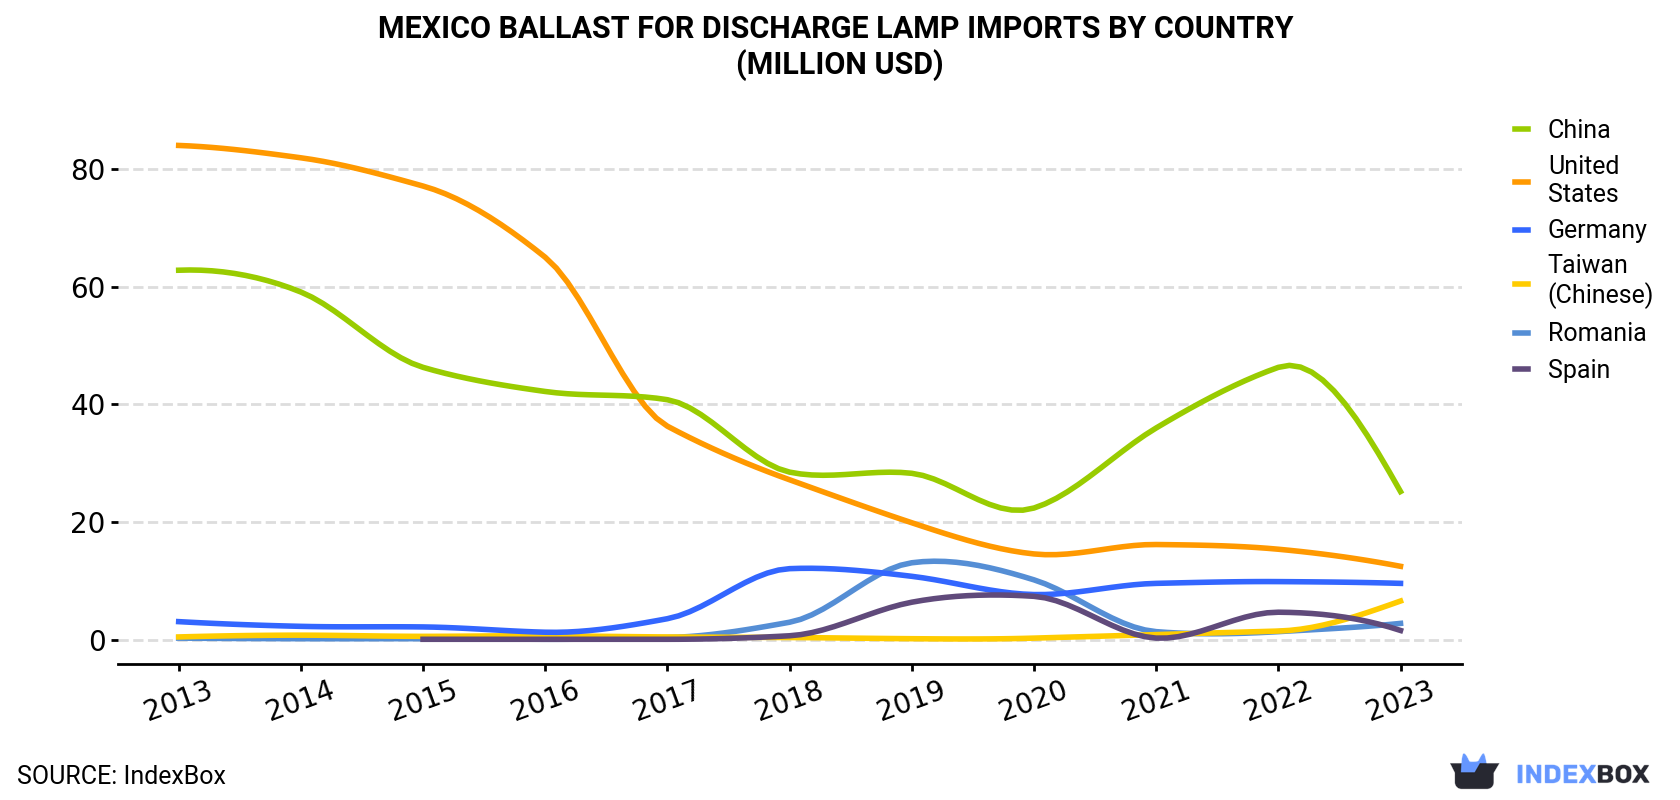 Mexico Ballast For Discharge Lamp Imports By Country (Million USD)